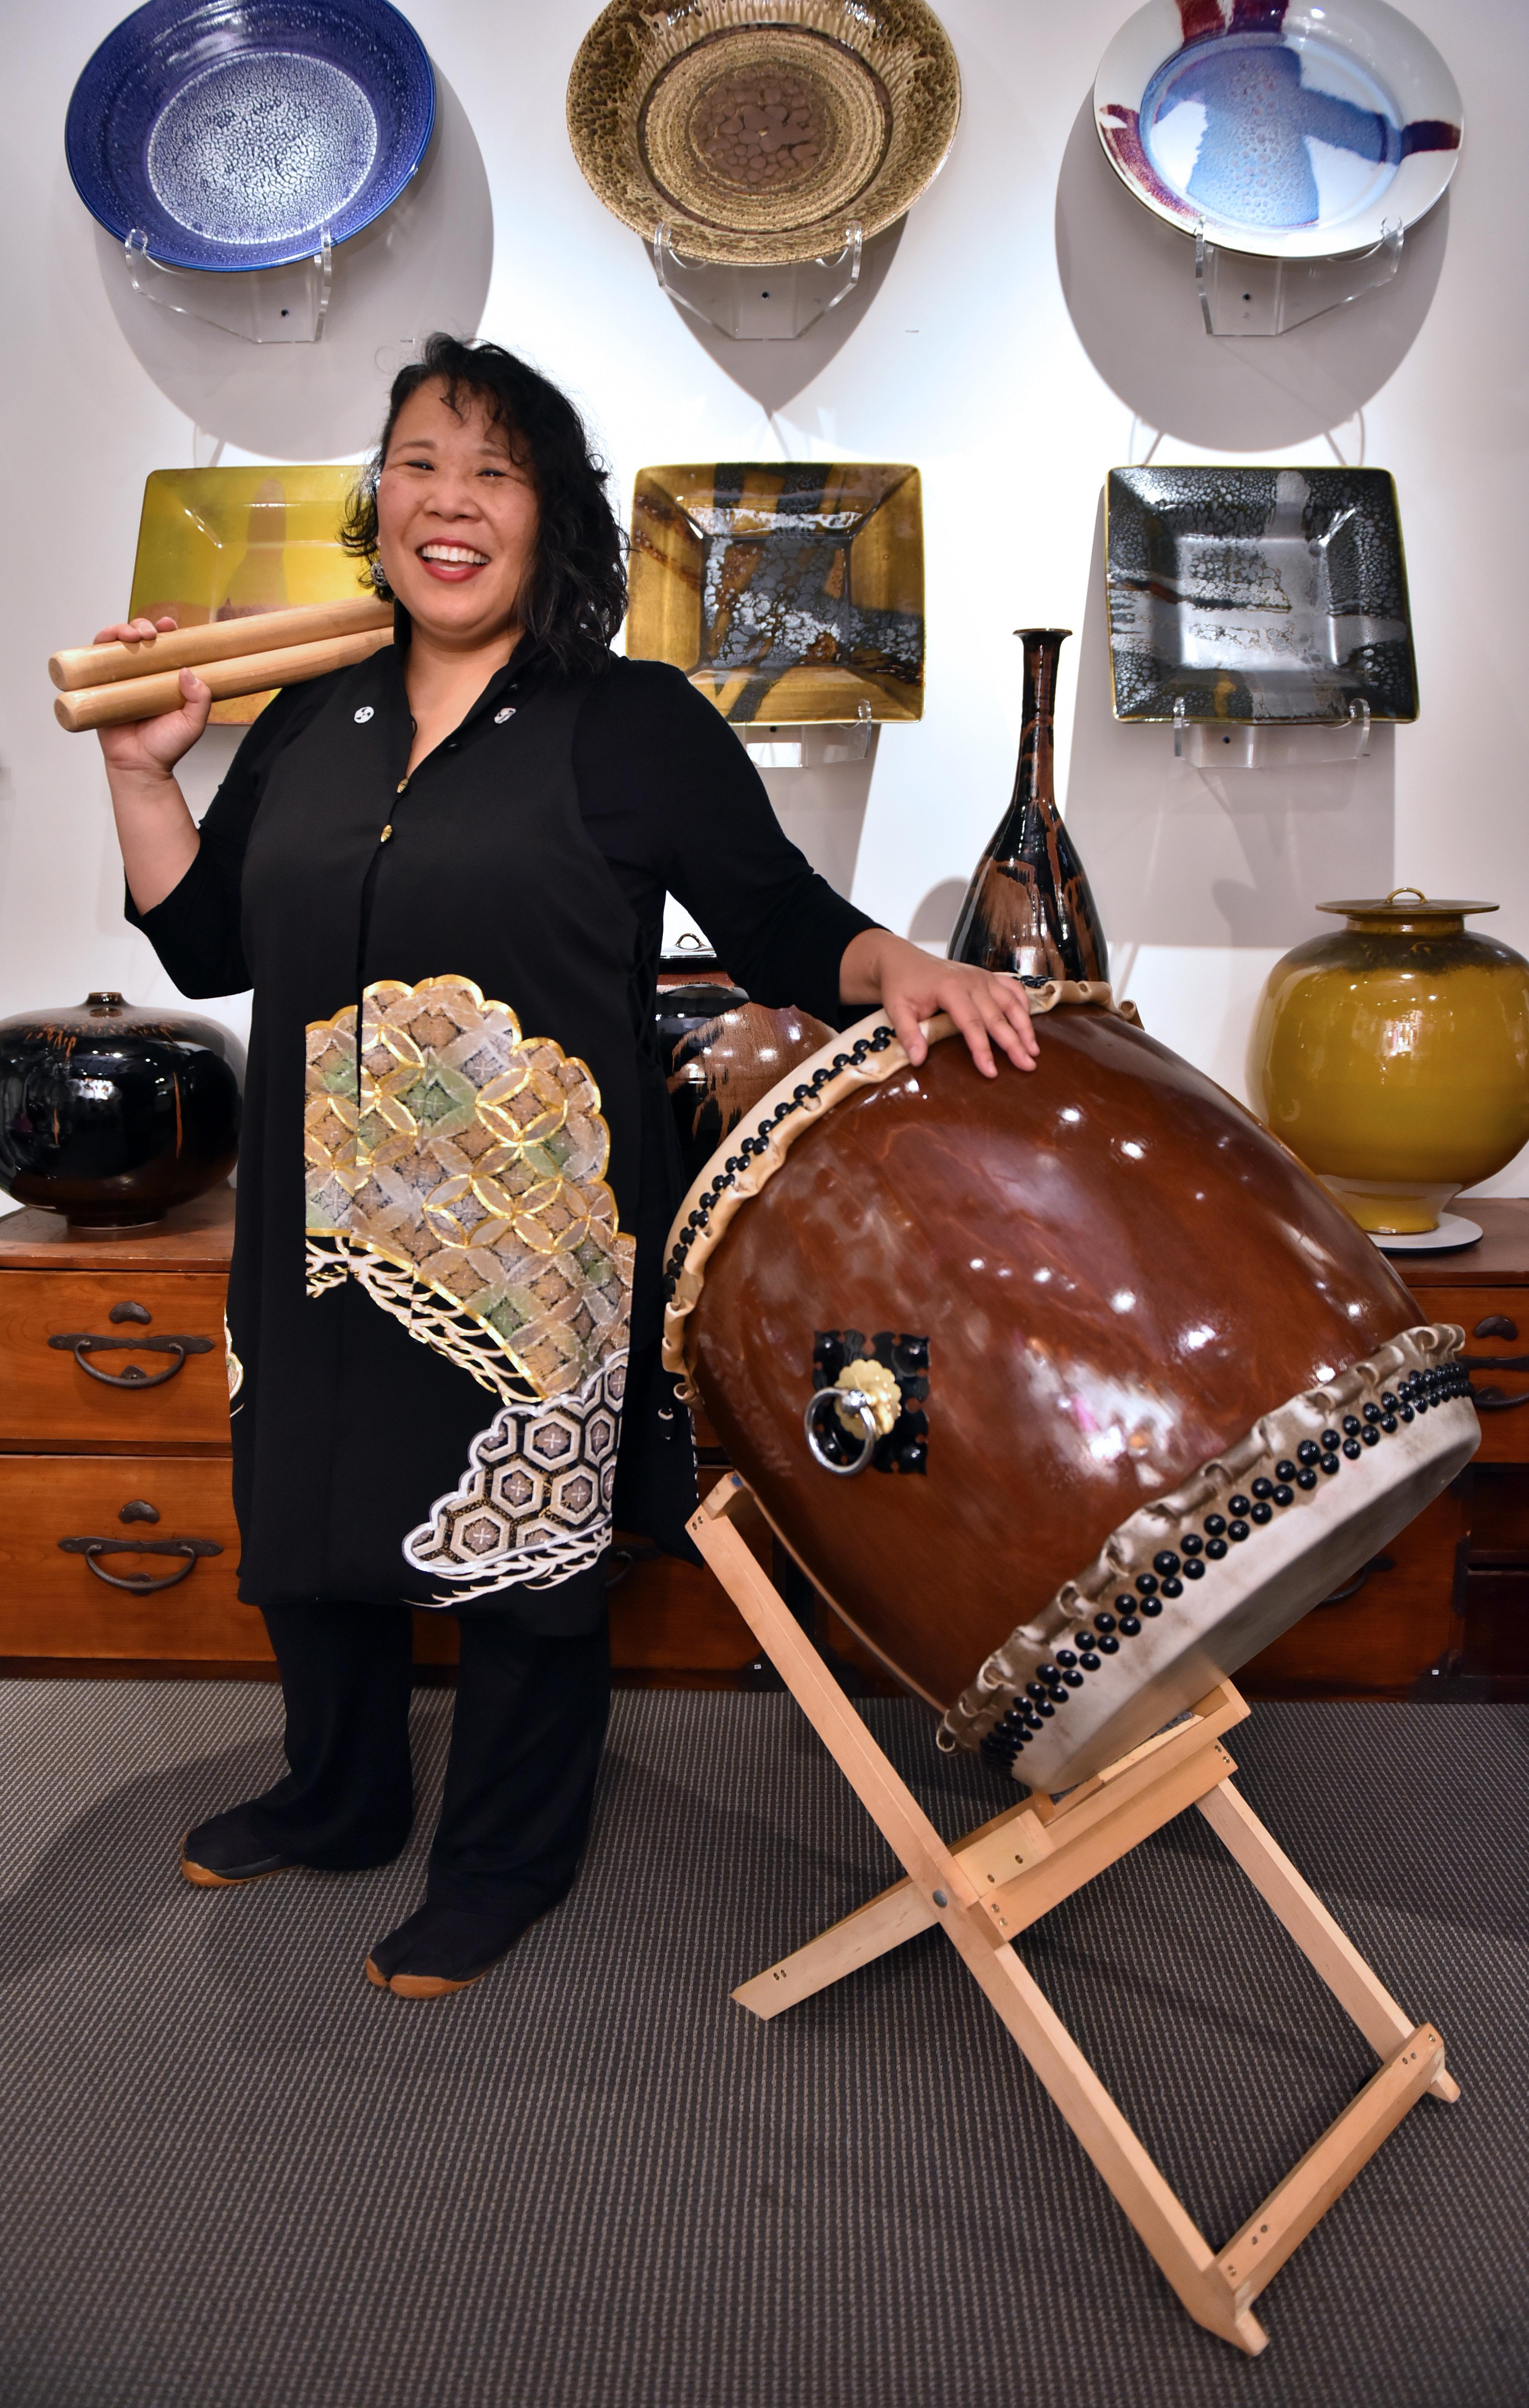 Karen Young wears a black shirt and holds taiko drum sticks in one hand. Her other hand is resting on a Japanese taiko drum.